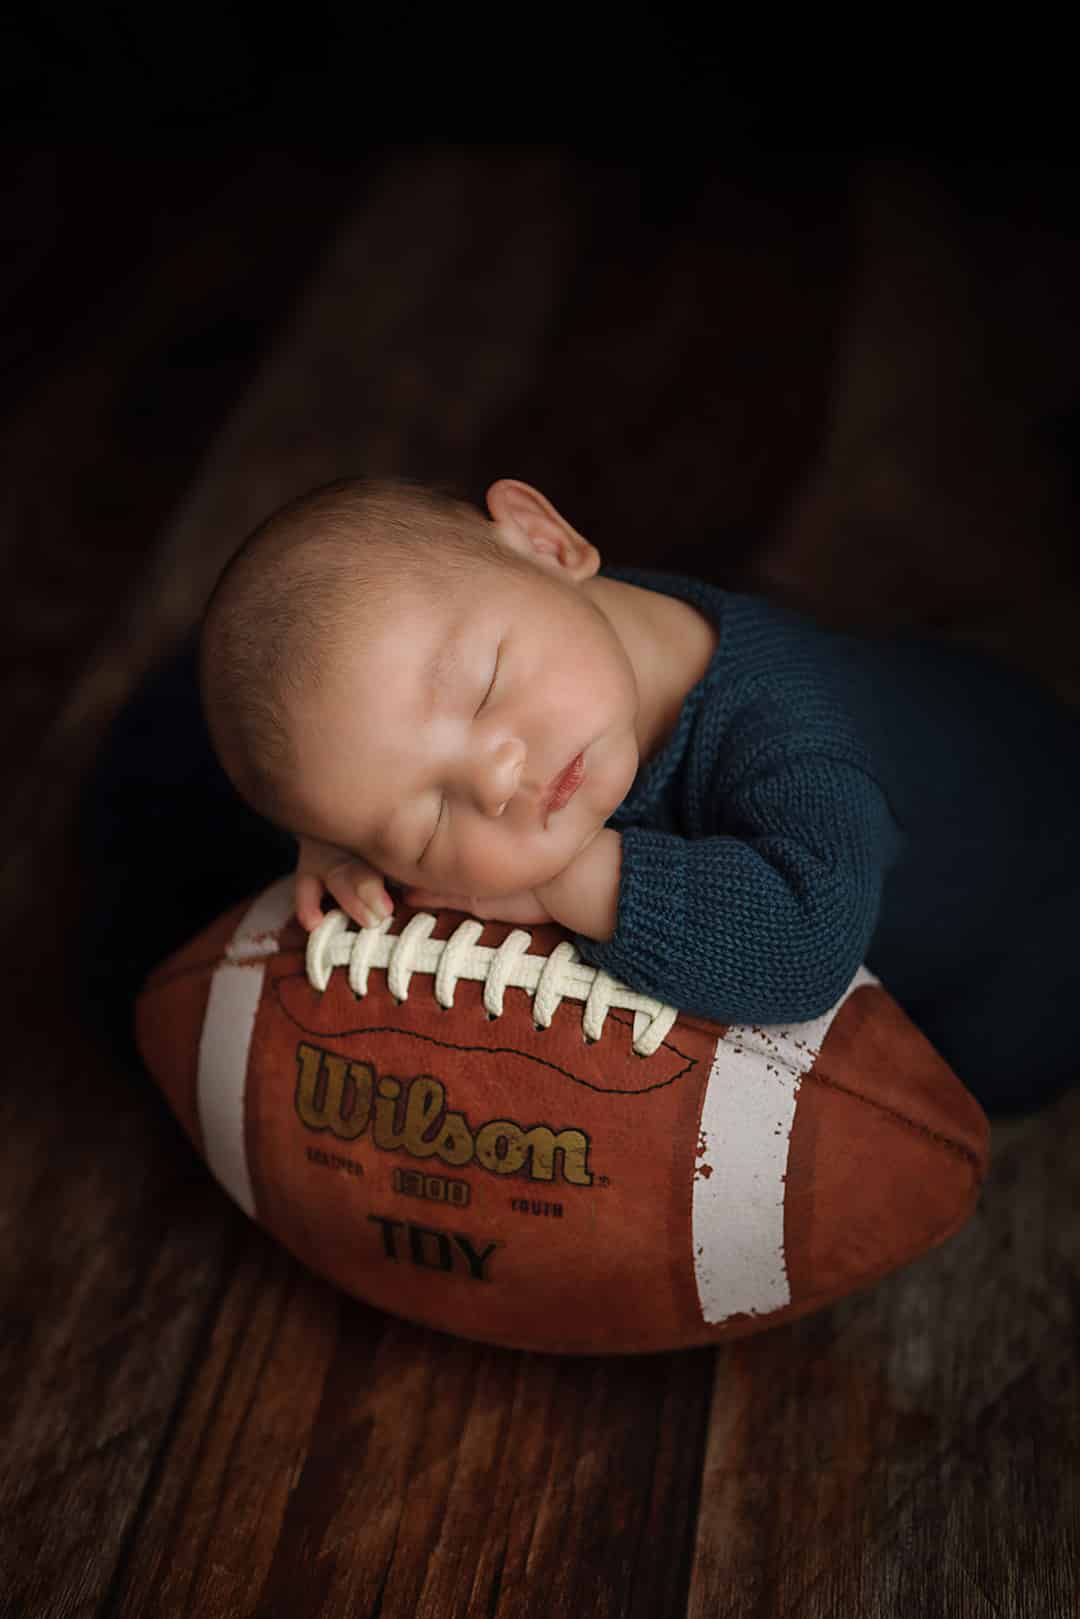 Windham NH Newborn Portrait. Baby sleeping with head on hands laying on a football.